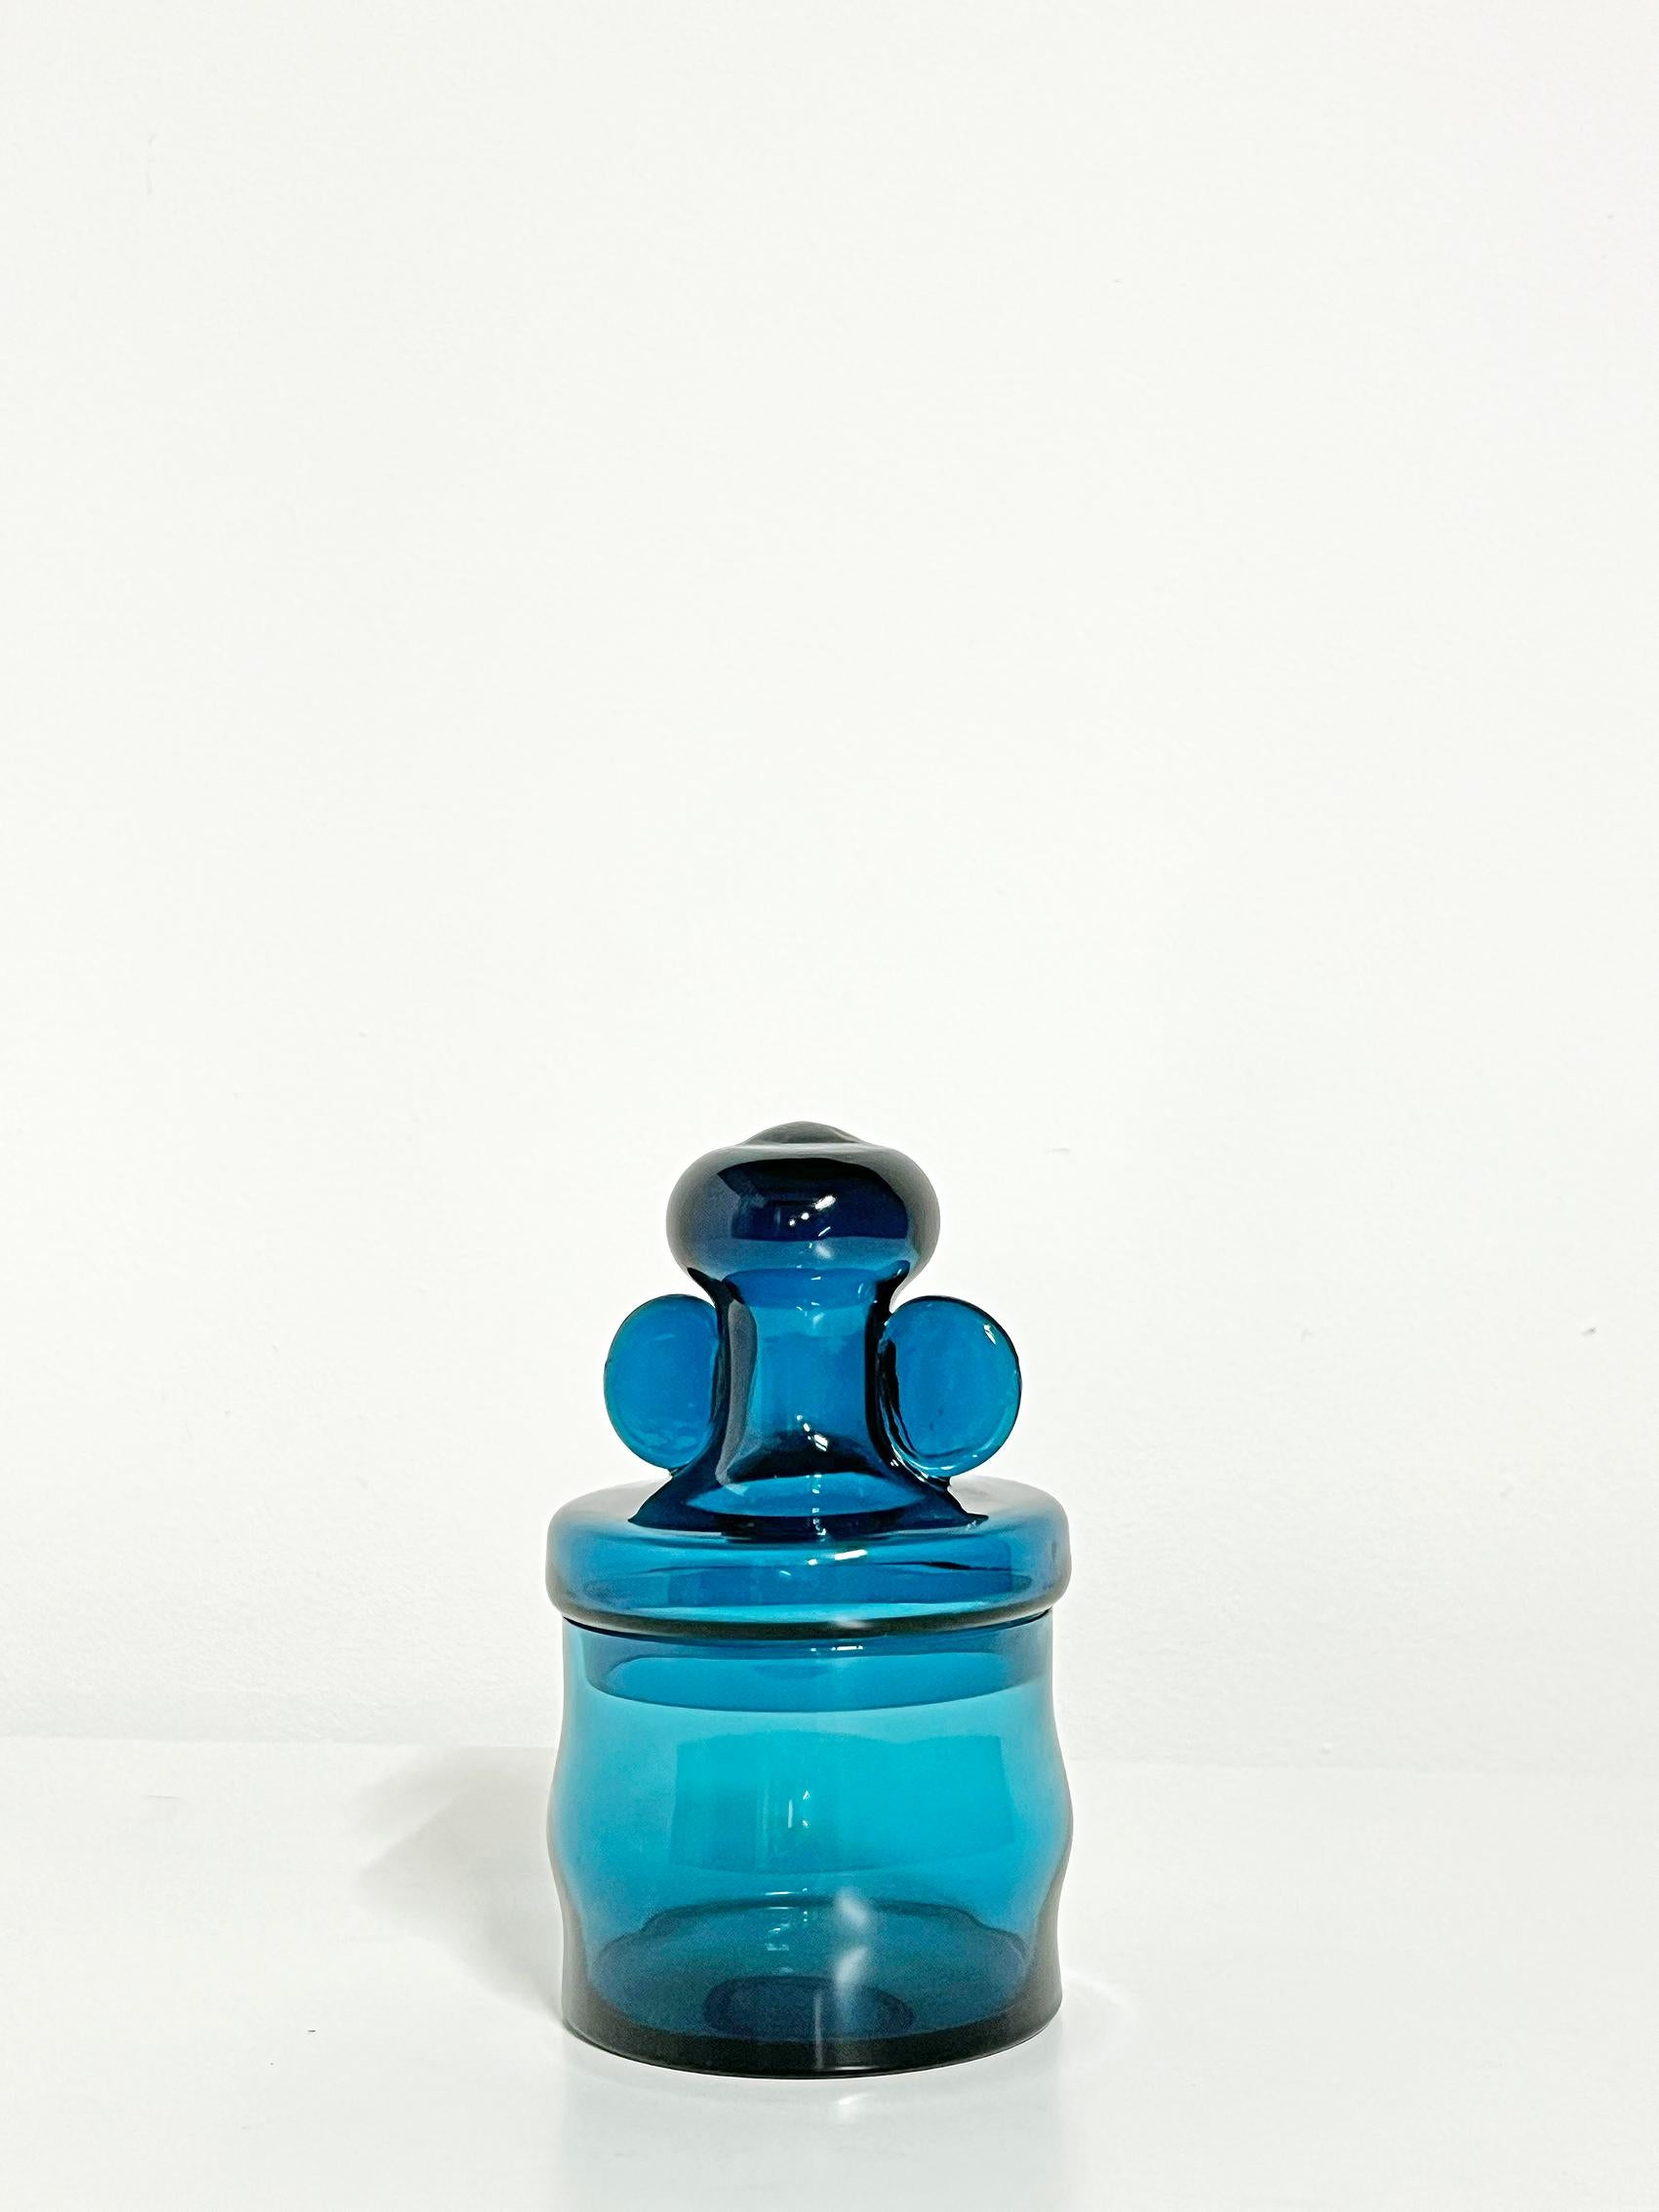 Cool Scandinavian Modern jar in glass from the blue glass series, Bertil Vallien for Boda/Åfors 1960s.
Good vintage condition, wear and patina consistent with age and use. 